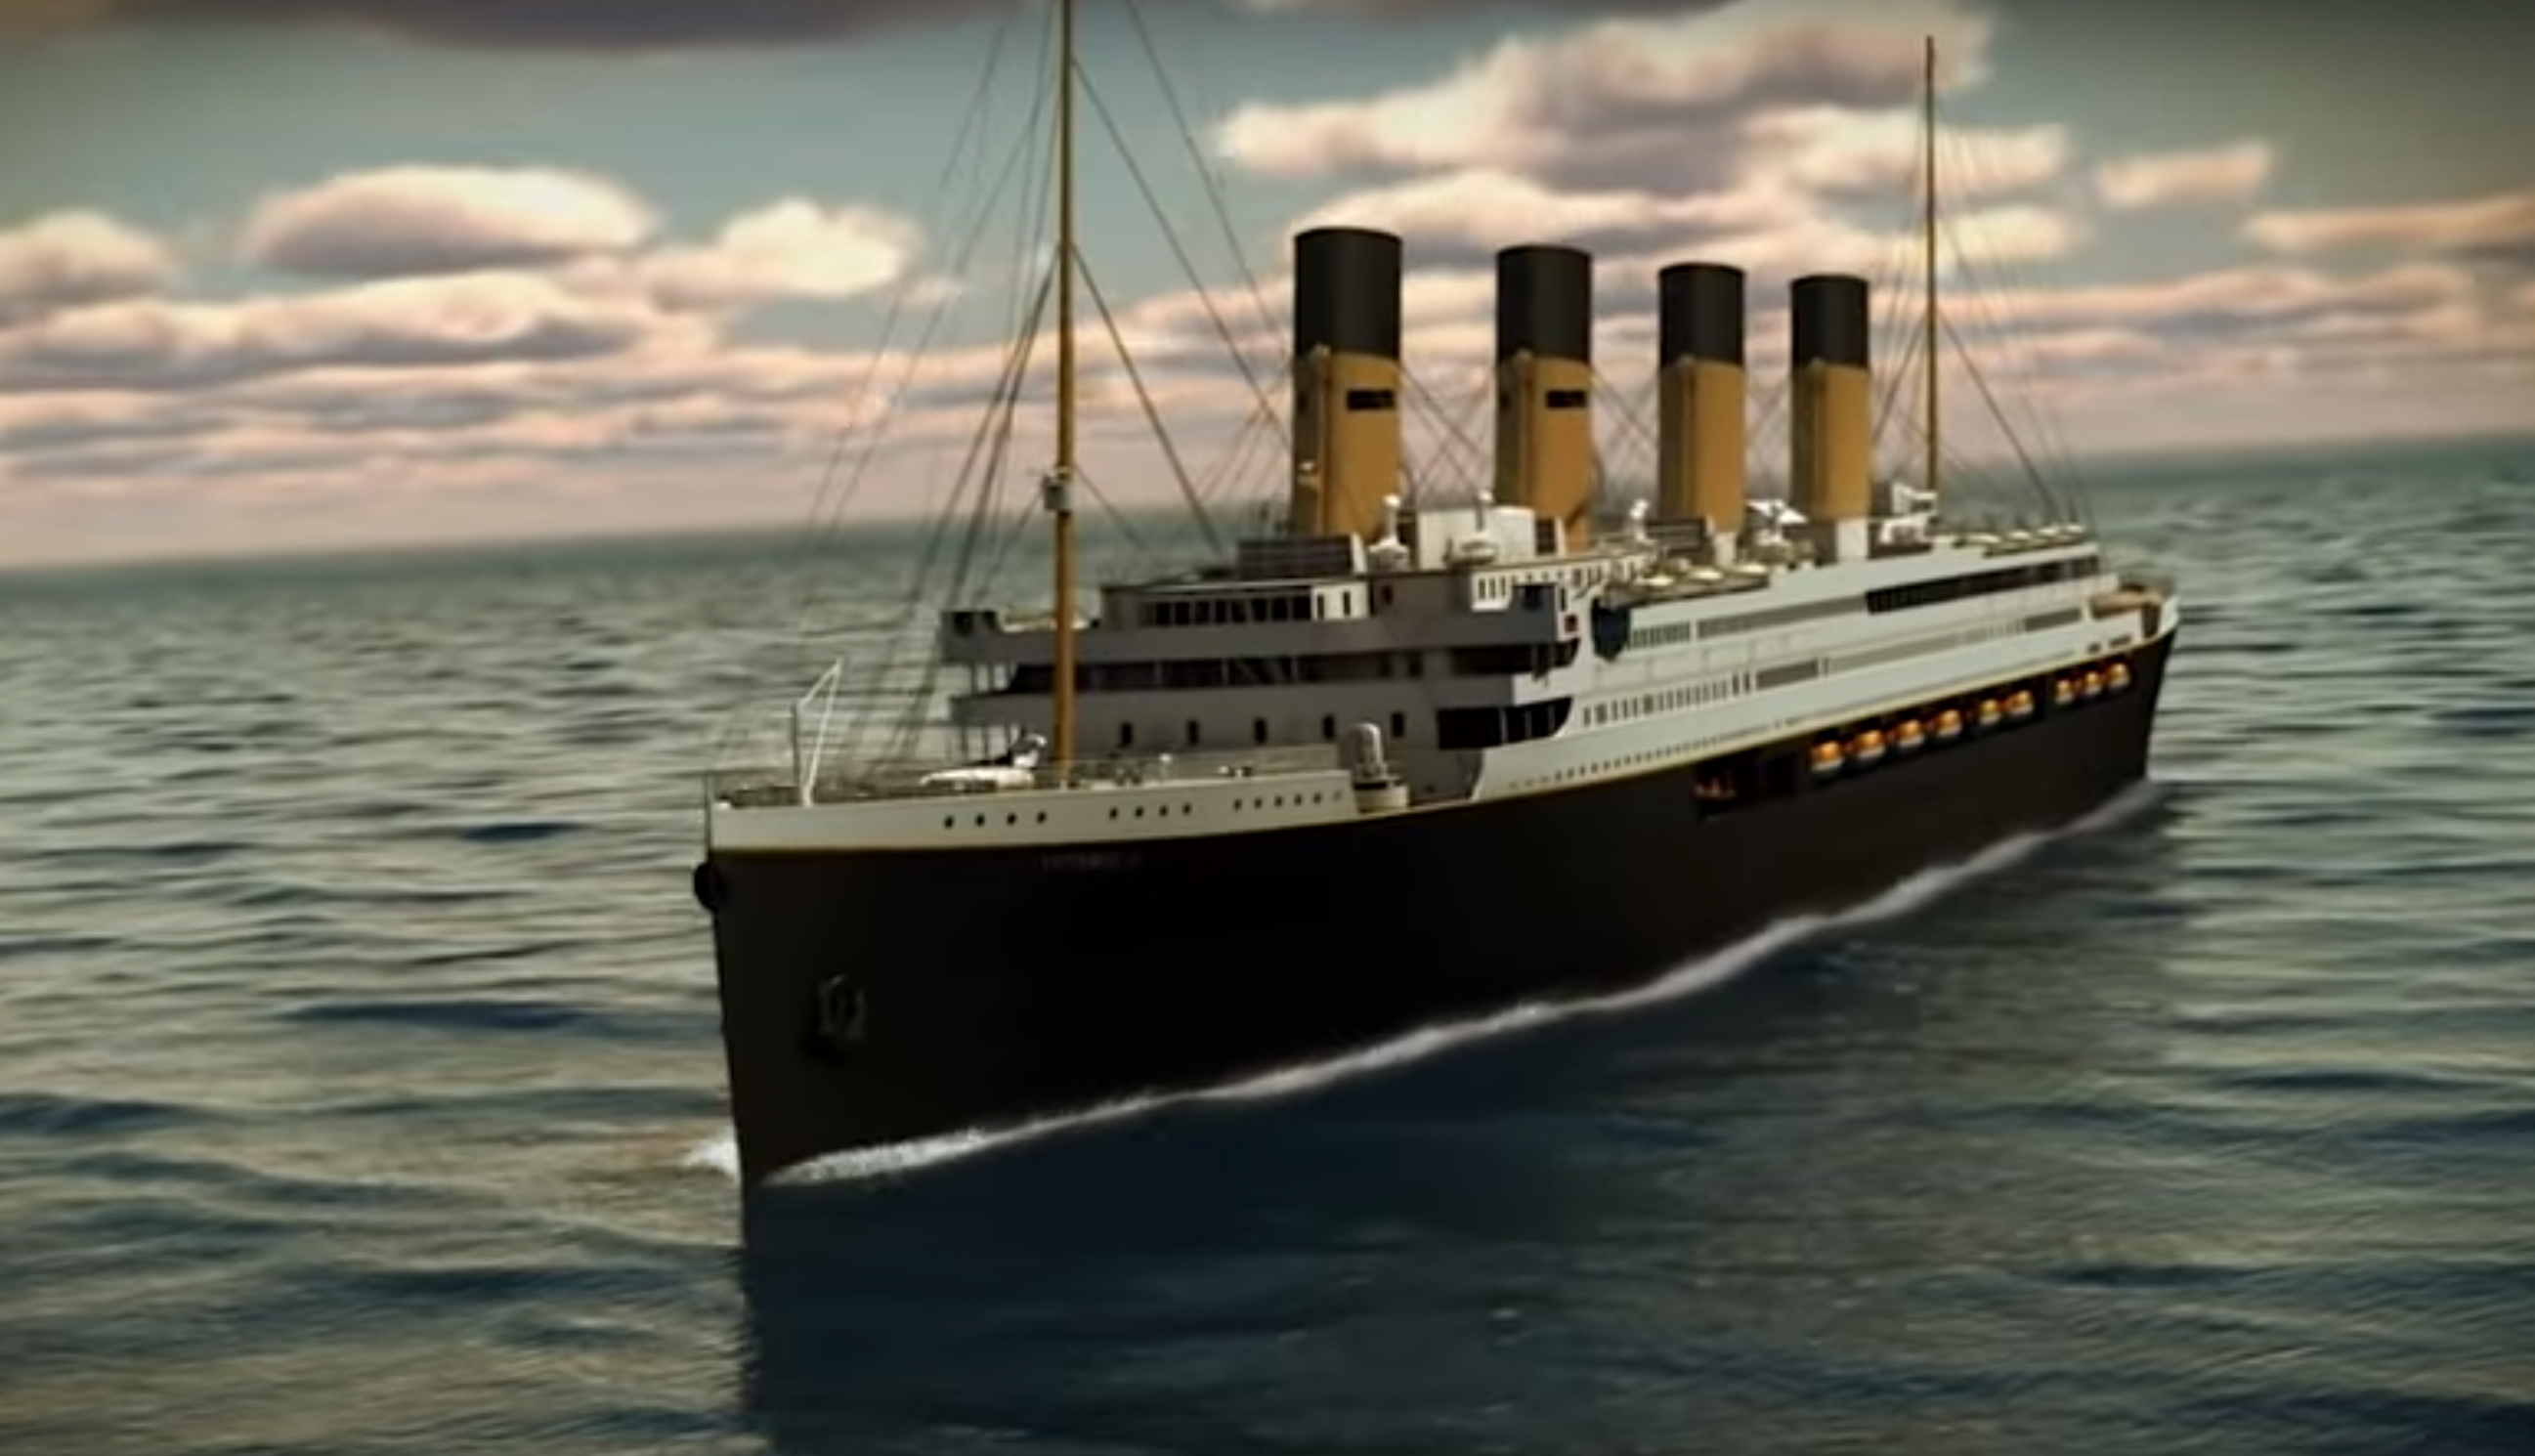 Titanic II could set sail by 2022, following original route - CBS News